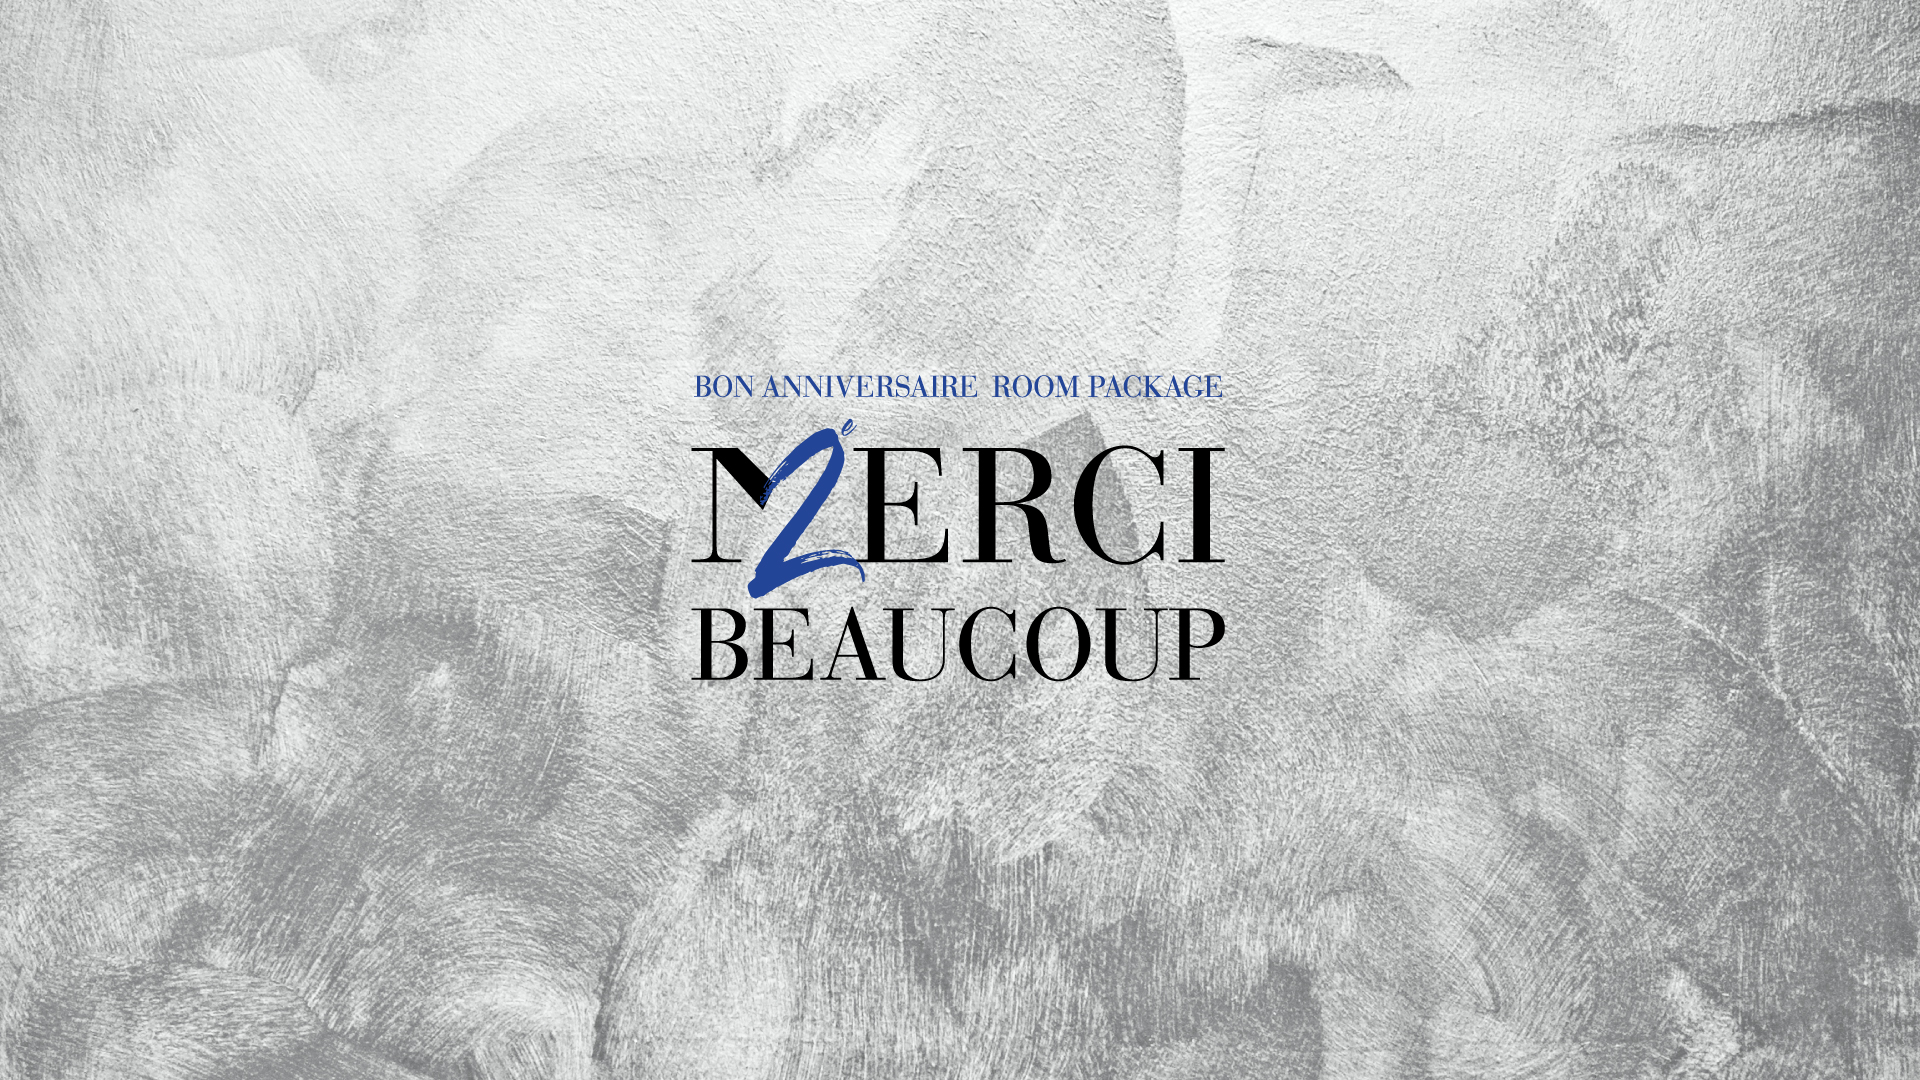 2nd-anniversary-package-merci-beaucoup